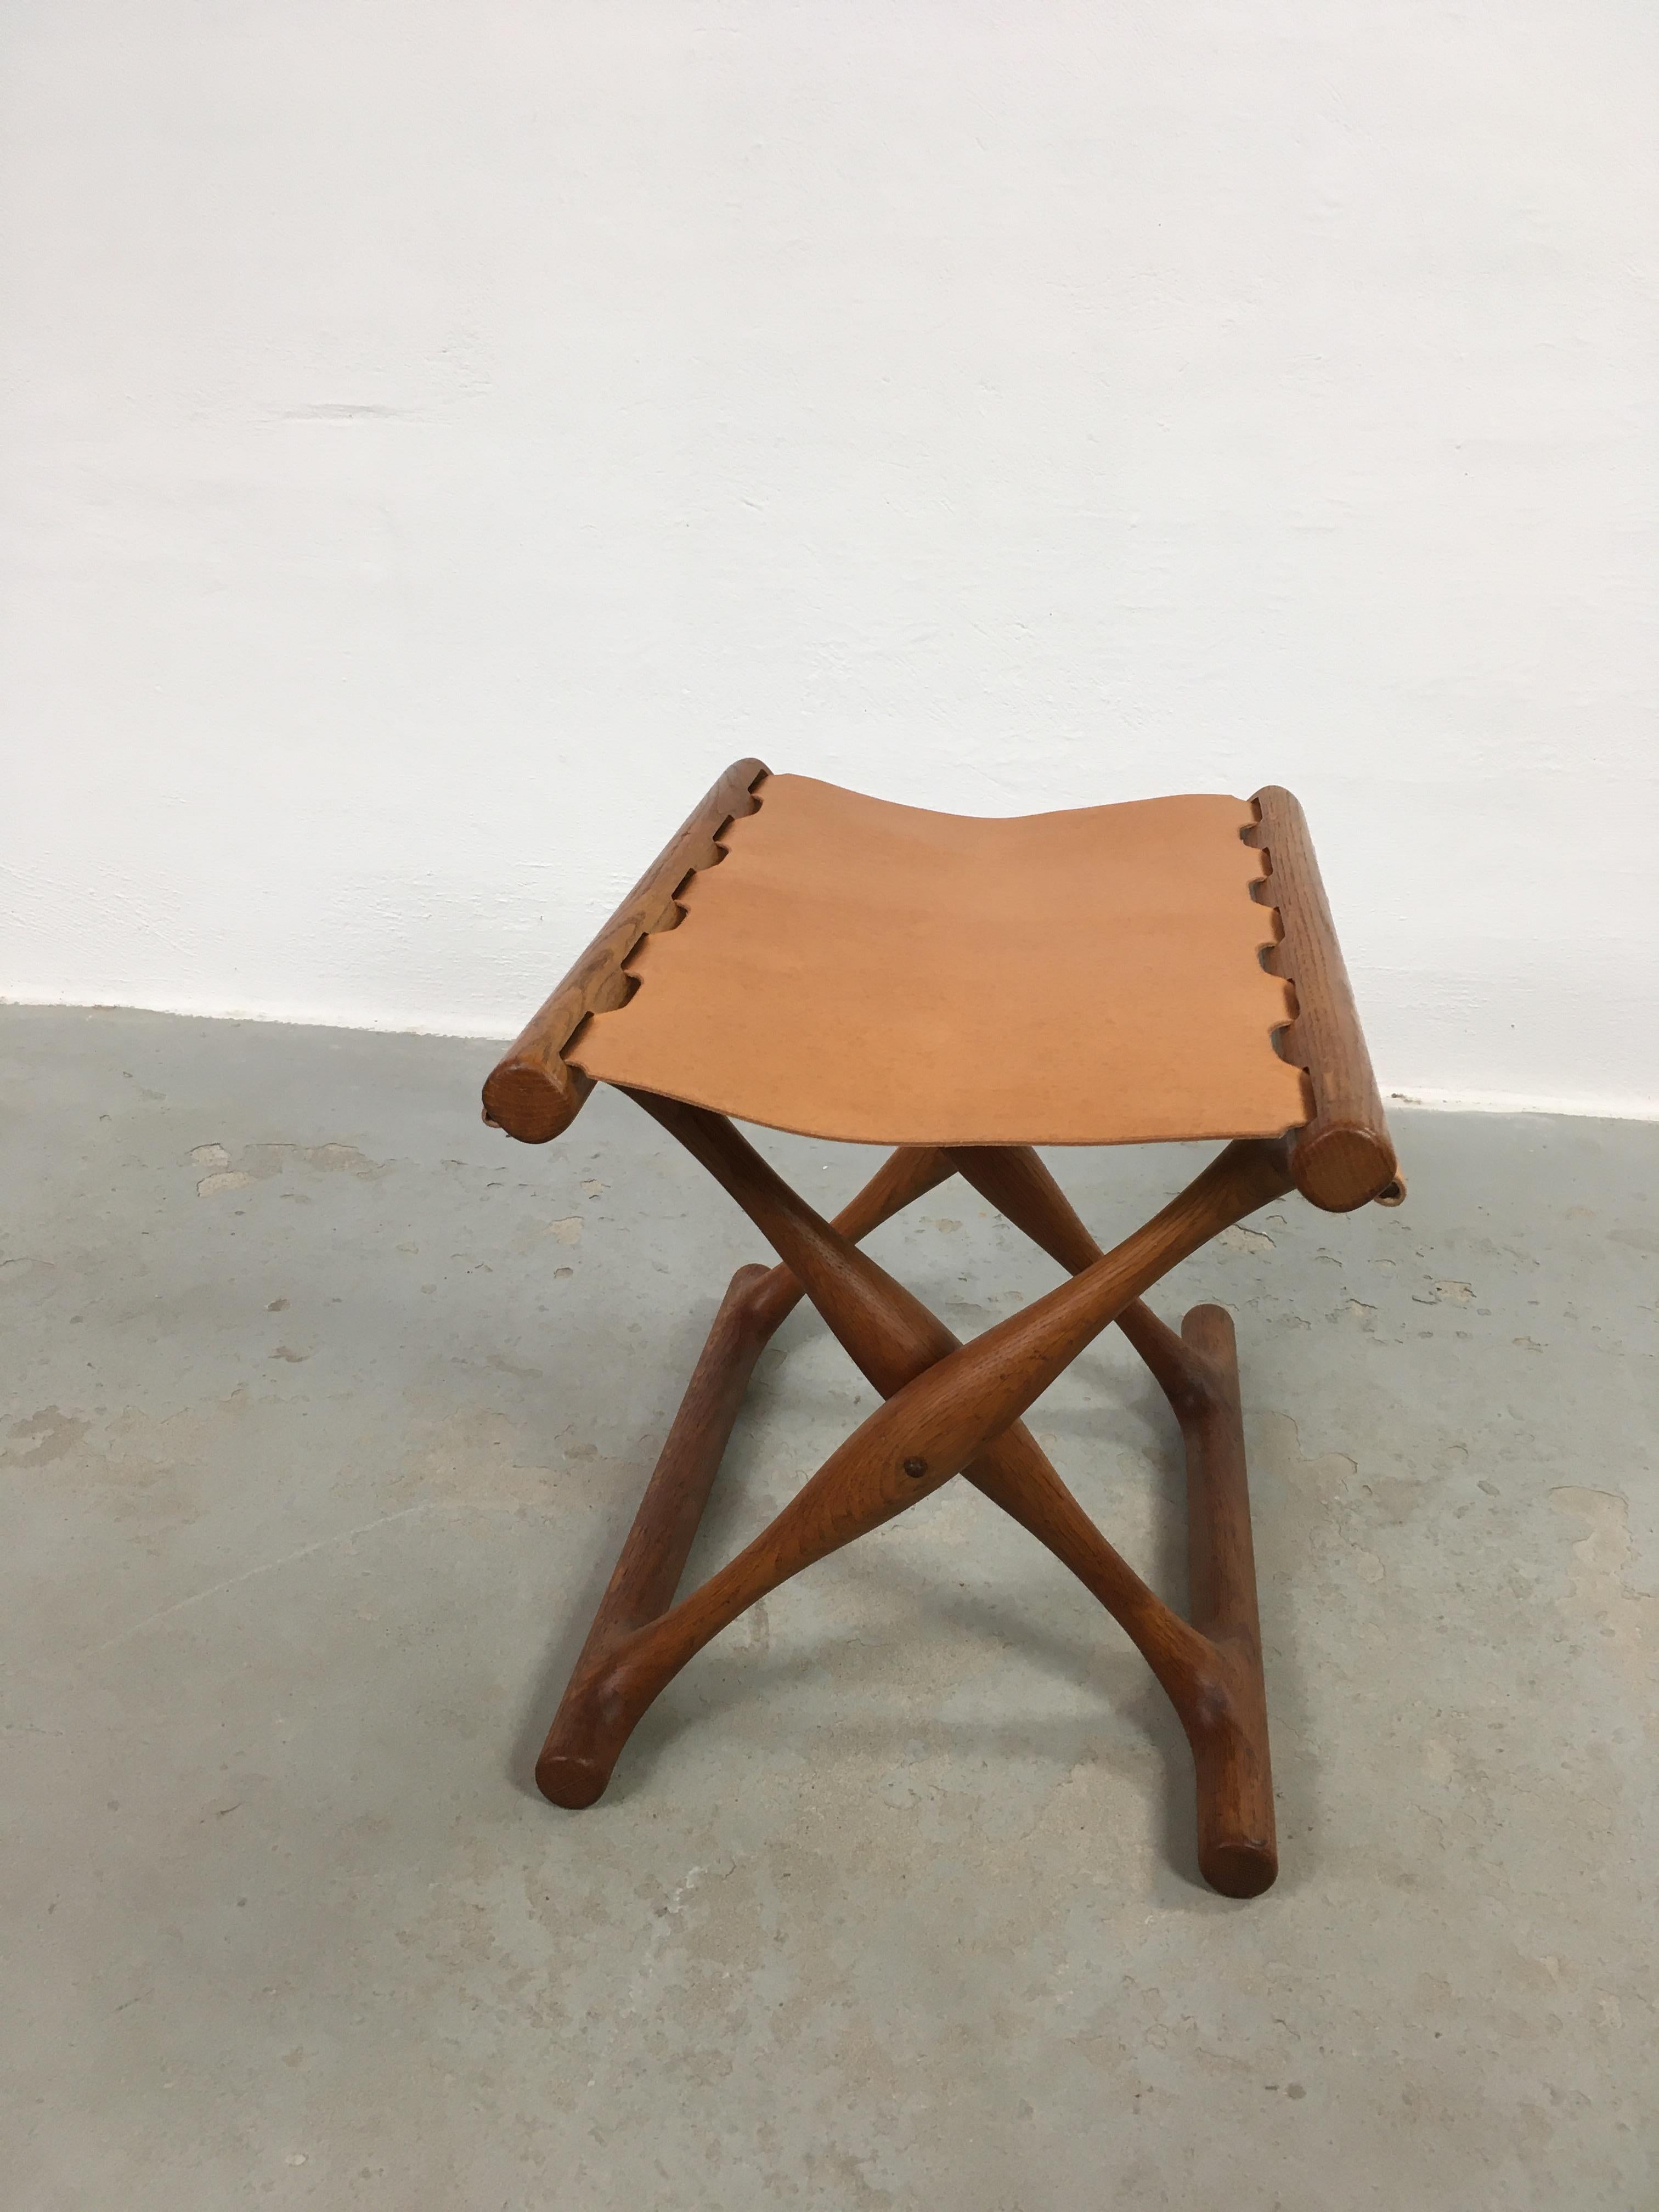 1960's Danish Poul Hundevad Folding Footstool in Oak and Leather Seat In Good Condition For Sale In Knebel, DK